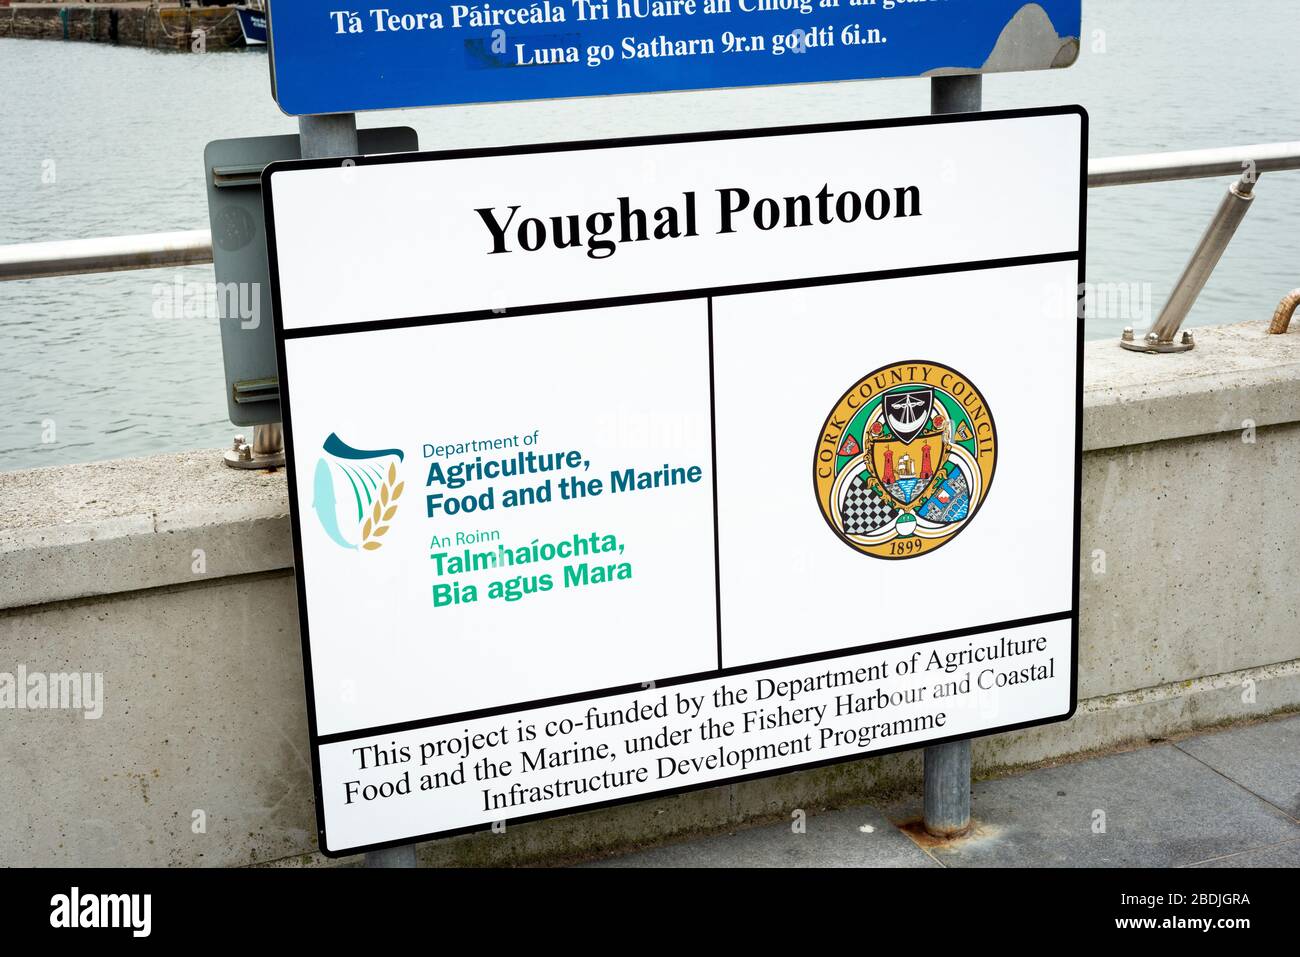 Information sign and Council notice for the new Youghal Pontoon co-funded by the Department of Agriculture Food and the Marine in Youghal, Ireland Stock Photo